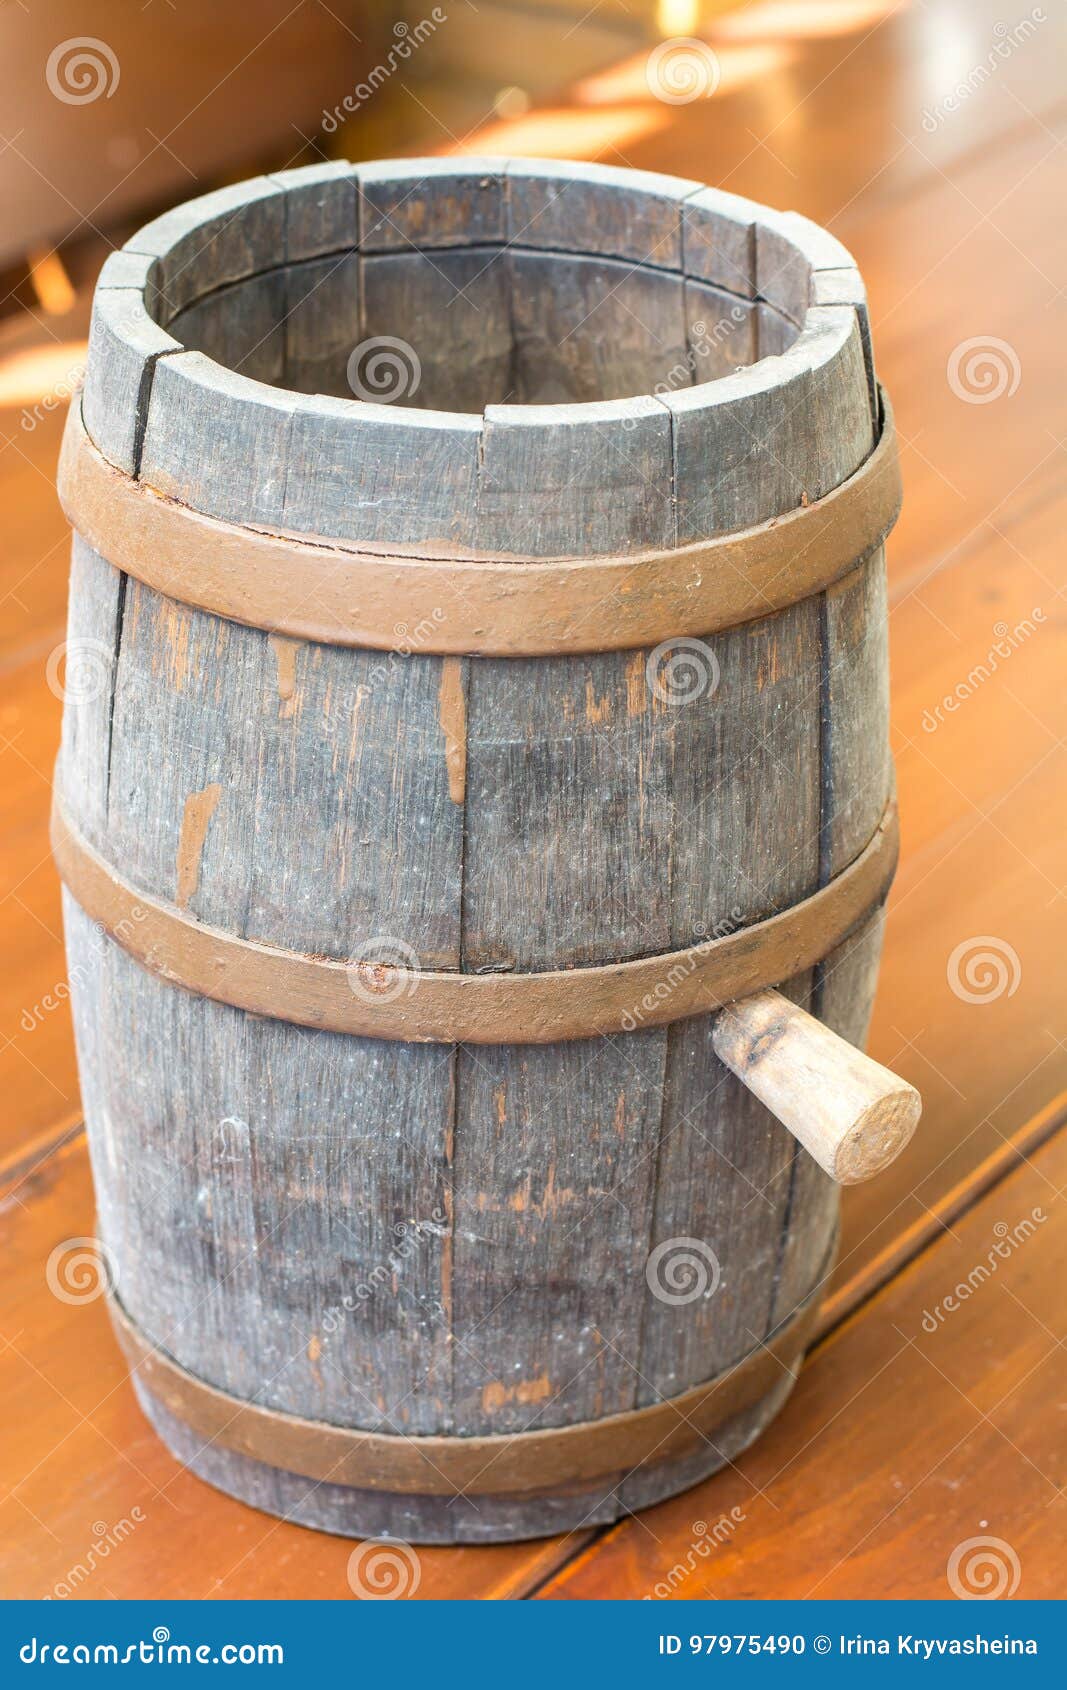 Ancient Wooden Barrel For Beer On The Table Stock Photo Image Of